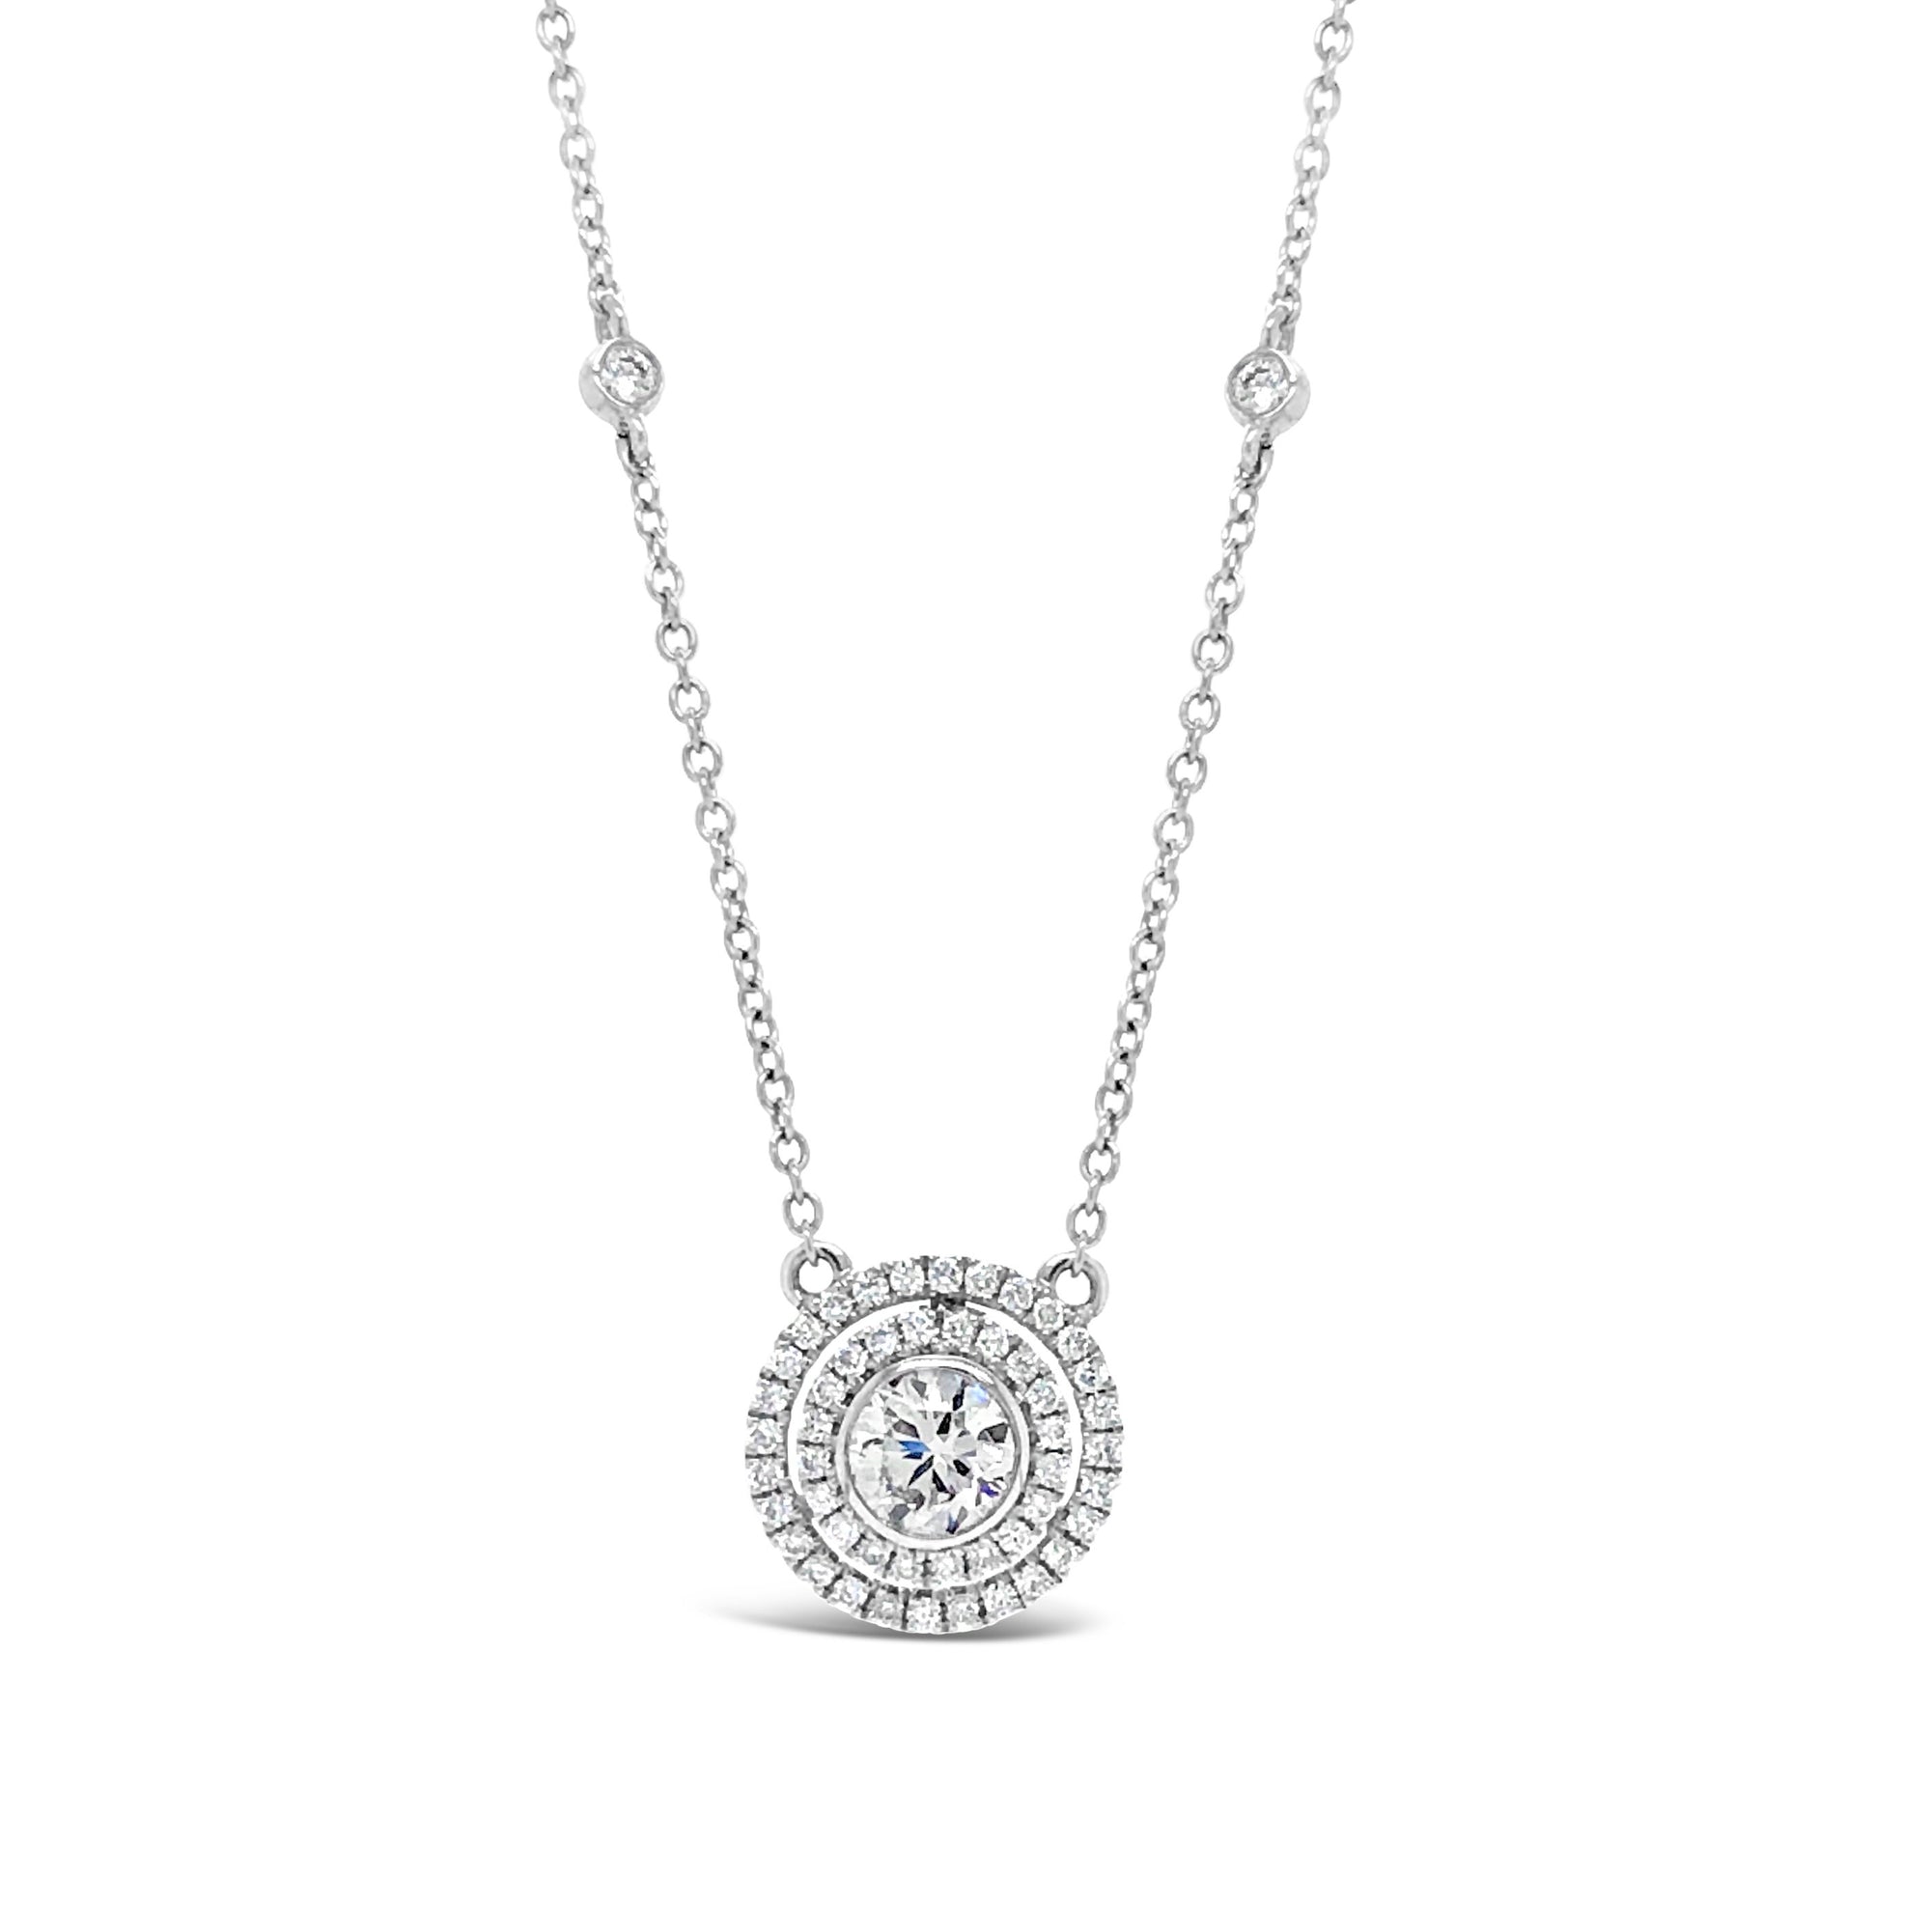 Diamond Double Halo Pendant Necklace  -18k gold weighing 3.31 grams  -50 round diamonds totaling 0.29 carats  -1 round diamonds 0.45 carats (G-color, VS1 clarity)